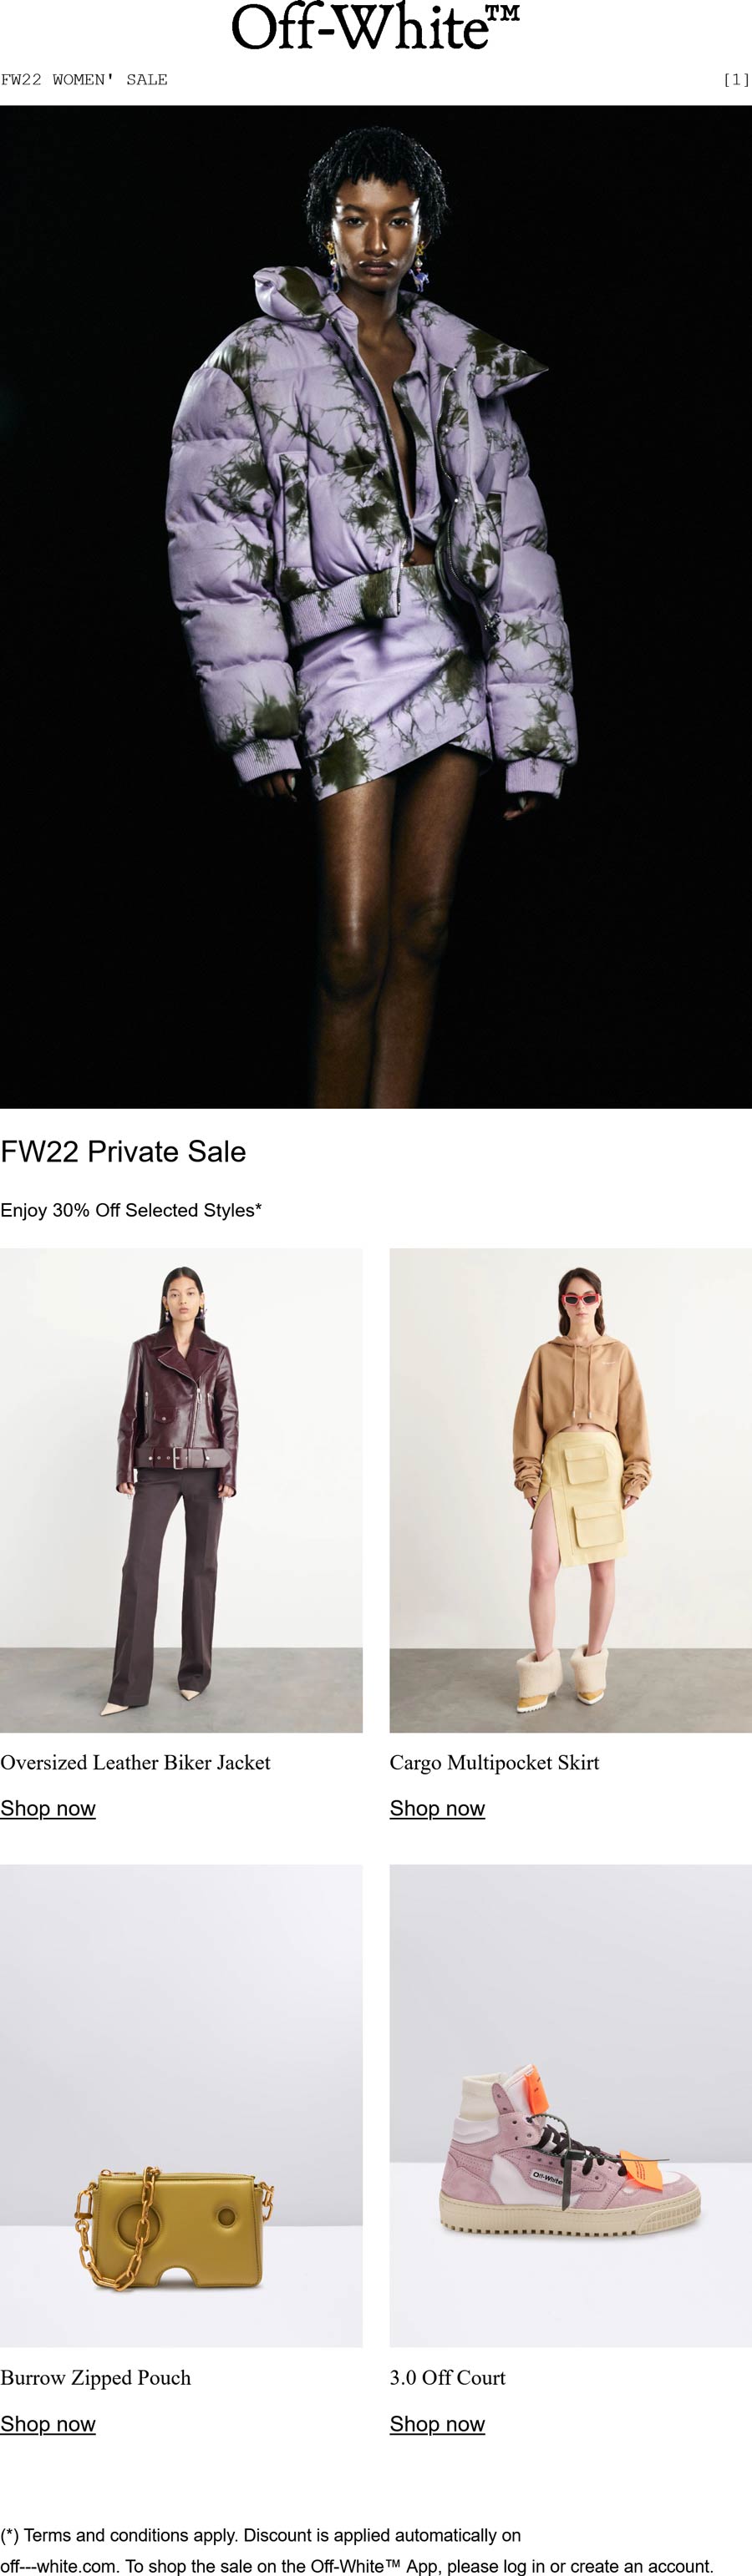 Off-White coupons & promo code for [November 2022]